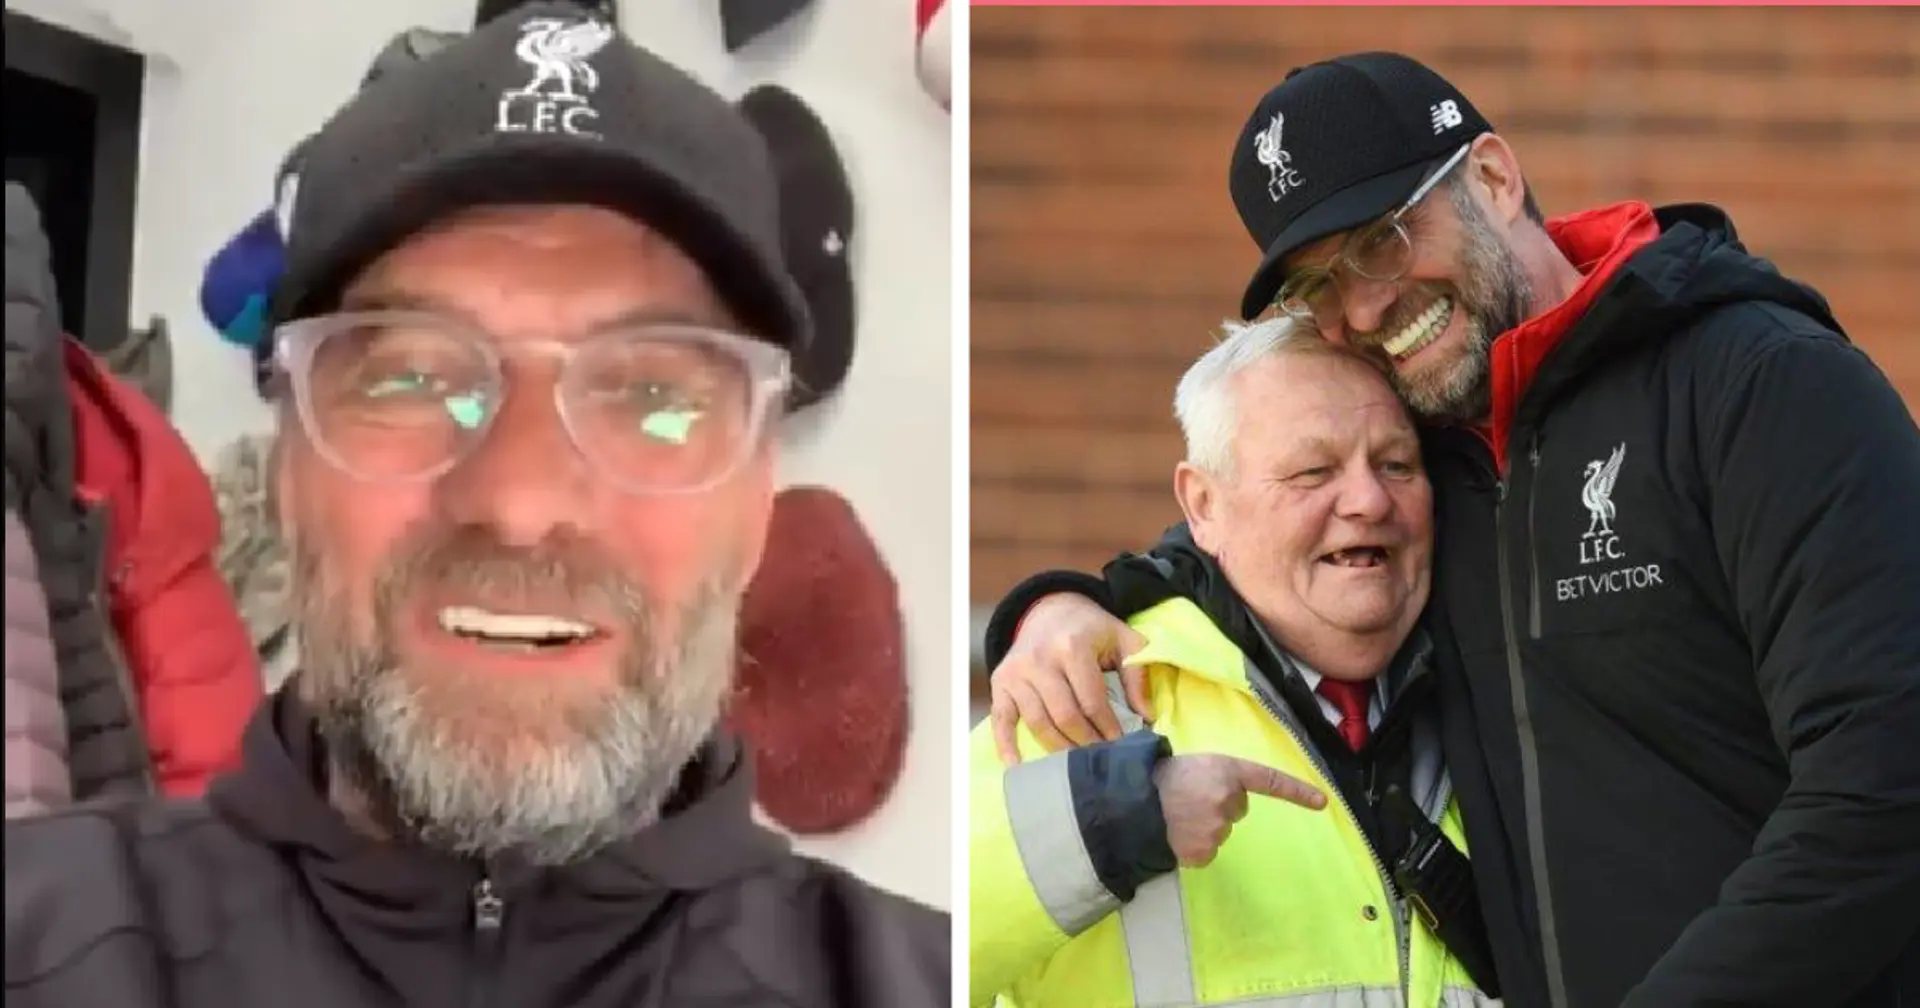 'You opened the gate for me and I will never forget that': Jurgen Klopp sends heartfelt message to legendary gatekeeper who retires after 26 years at Anfield